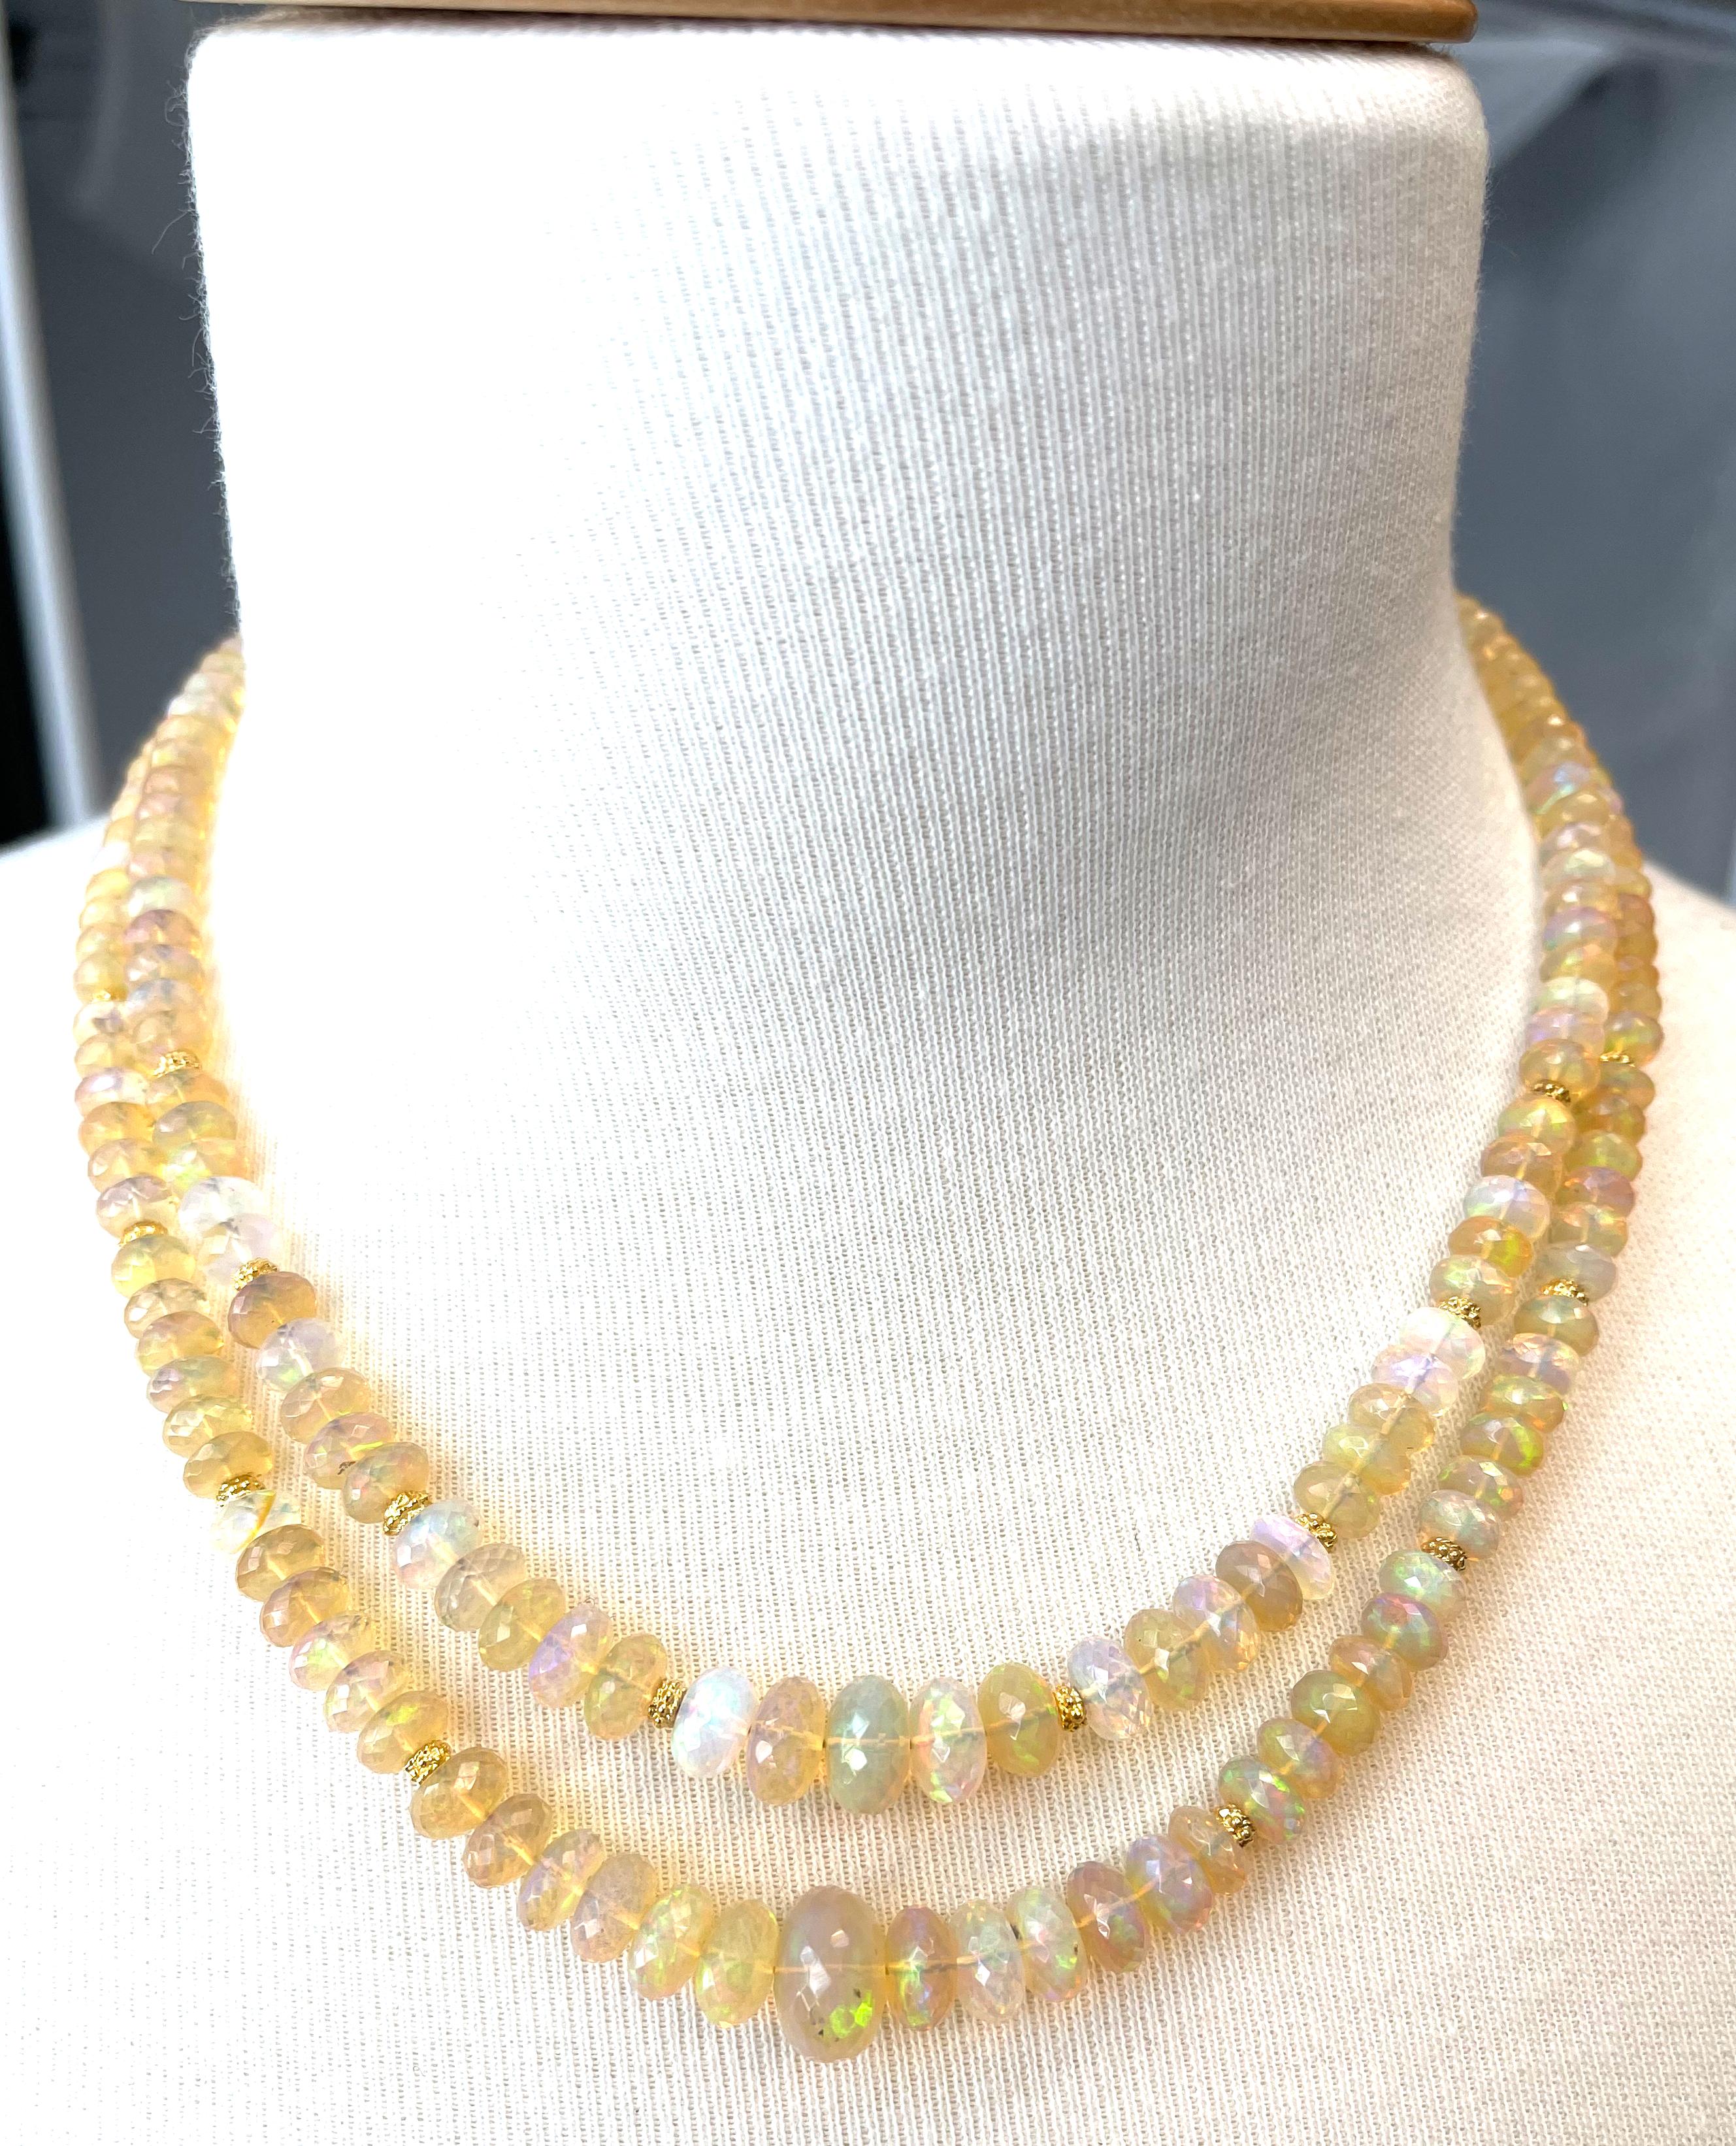 Double Strand Opal Bead Necklace, 170.45 Carats Total with Yellow Gold Accents For Sale 1